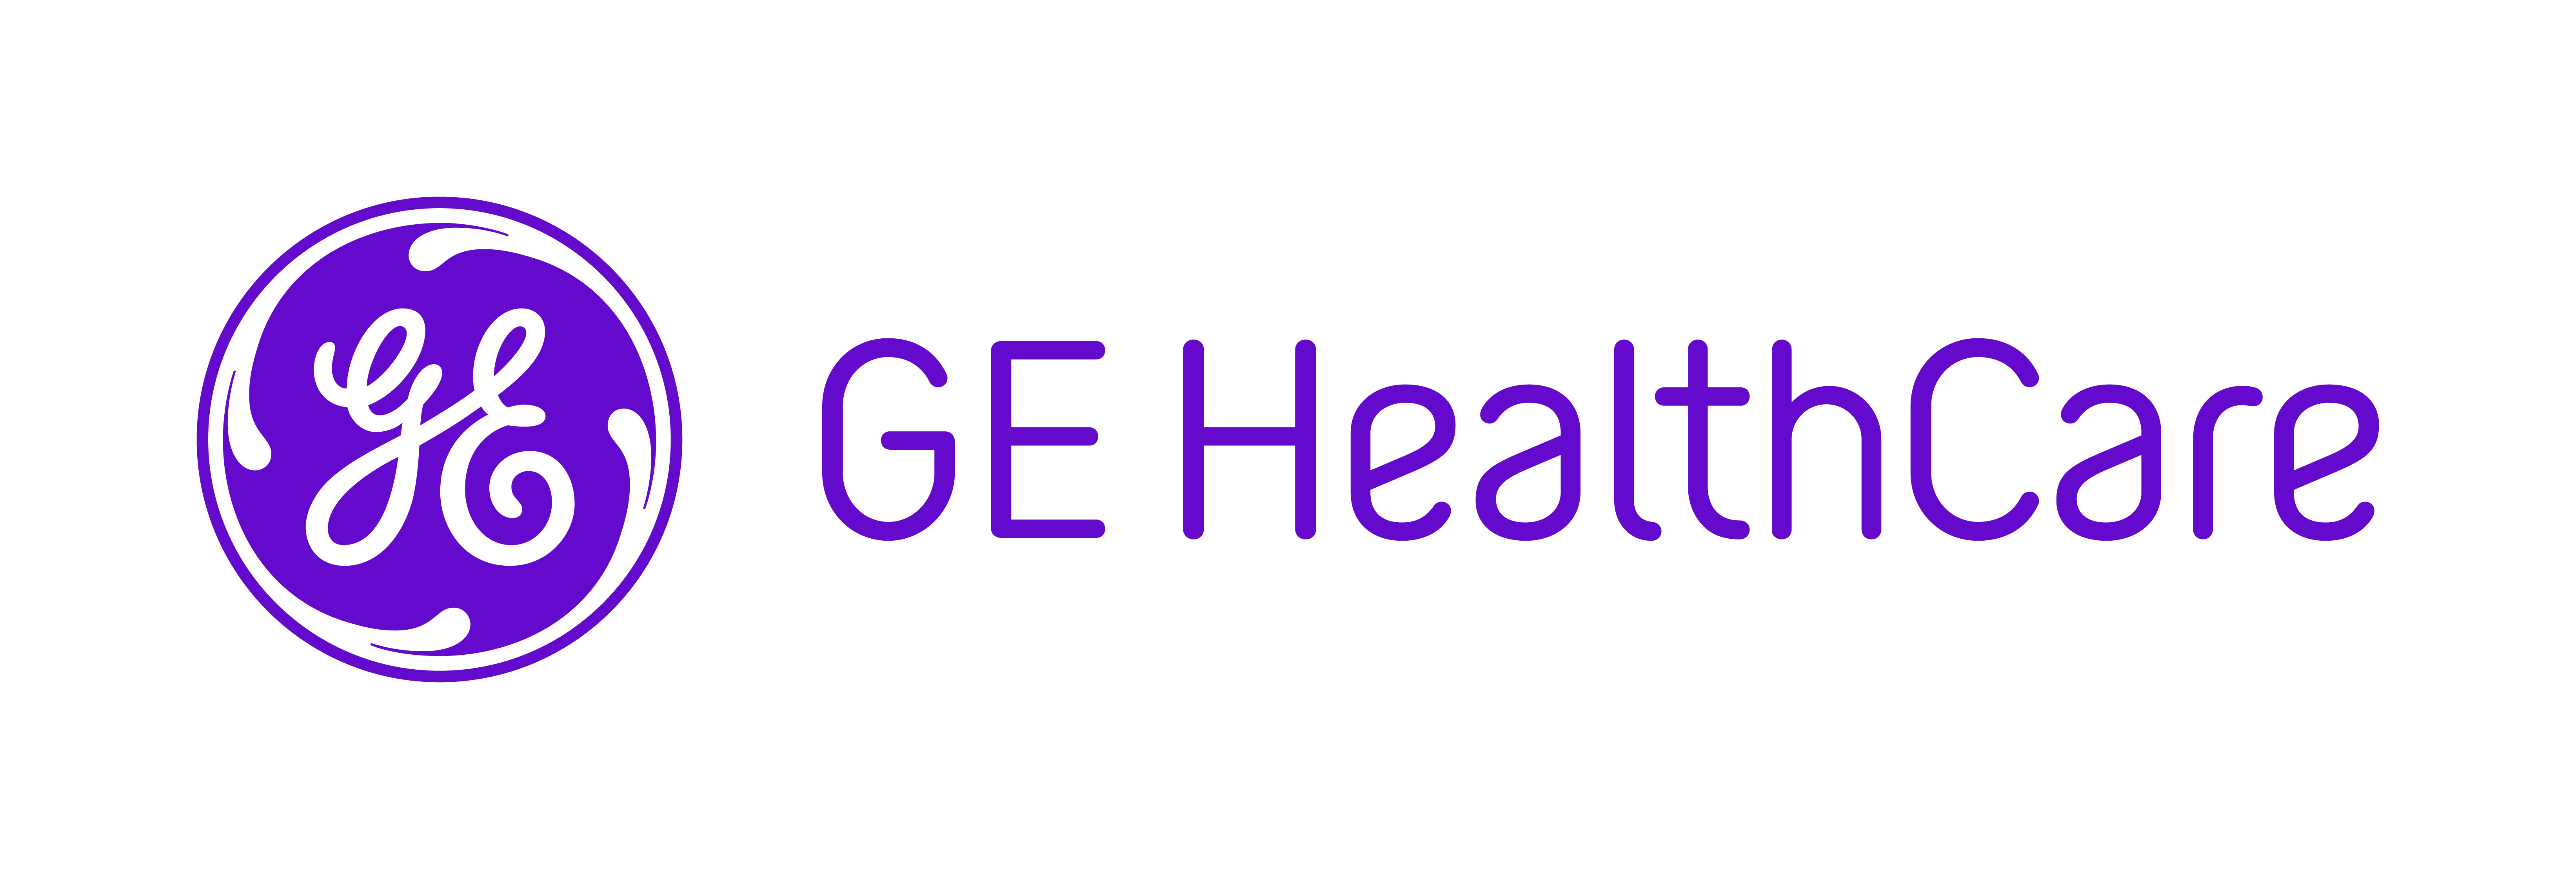 ge unveils brand names for three planned future public companies | business wire